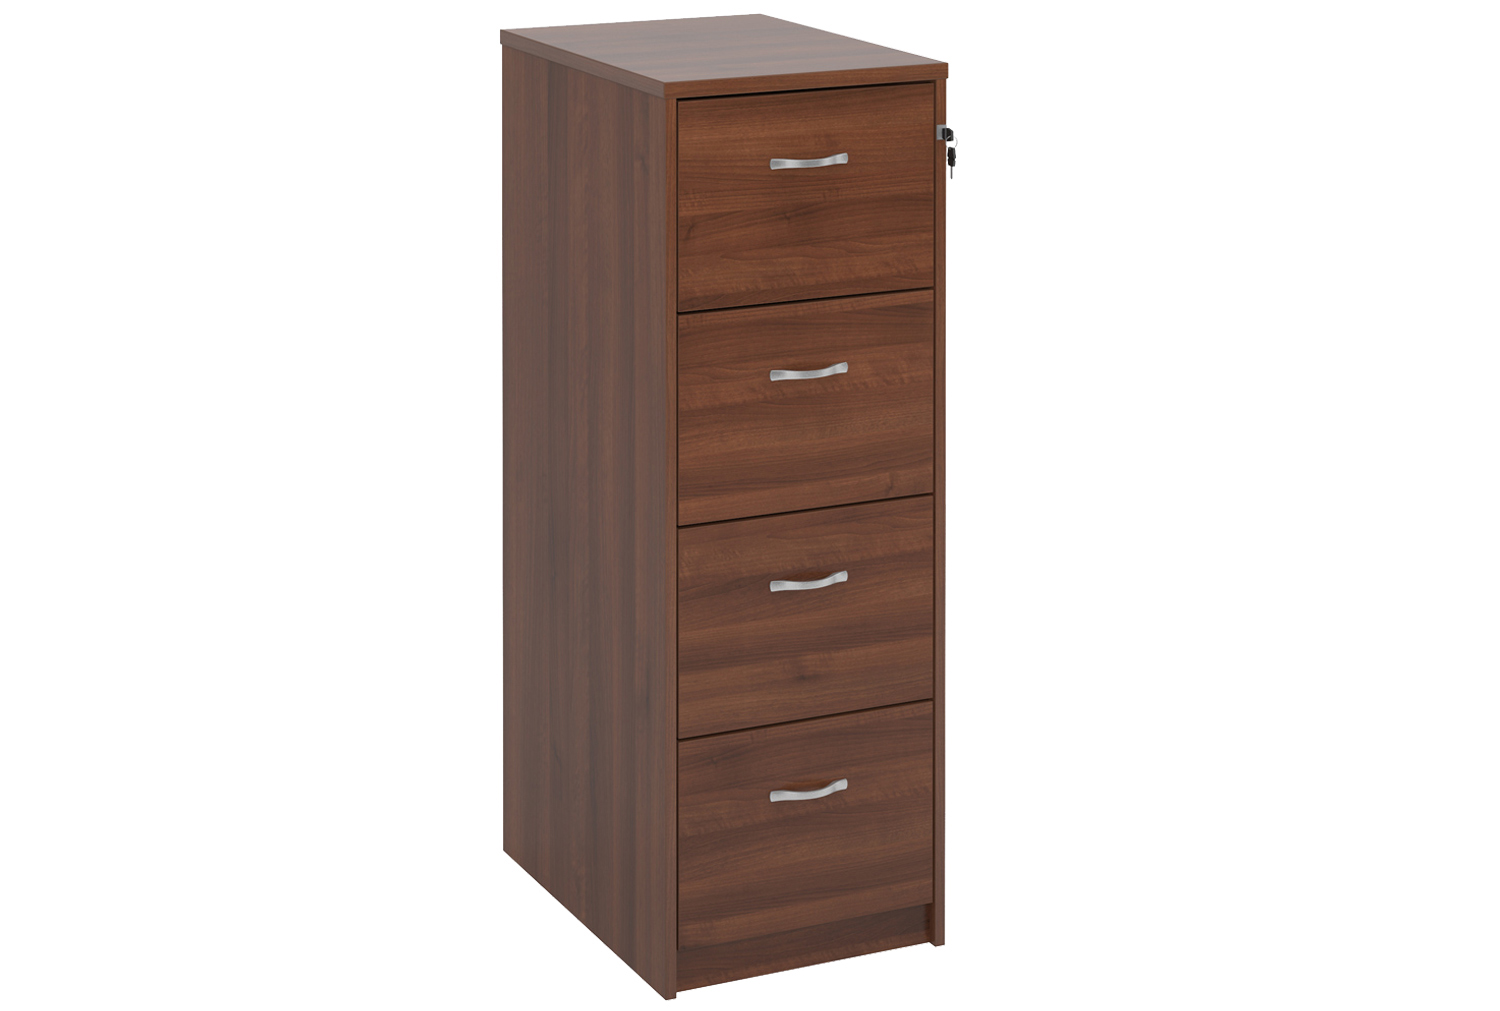 Duo Filing Cabinets, 4 Drawer - 48wx66dx136h (cm), Walnut, Express Delivery